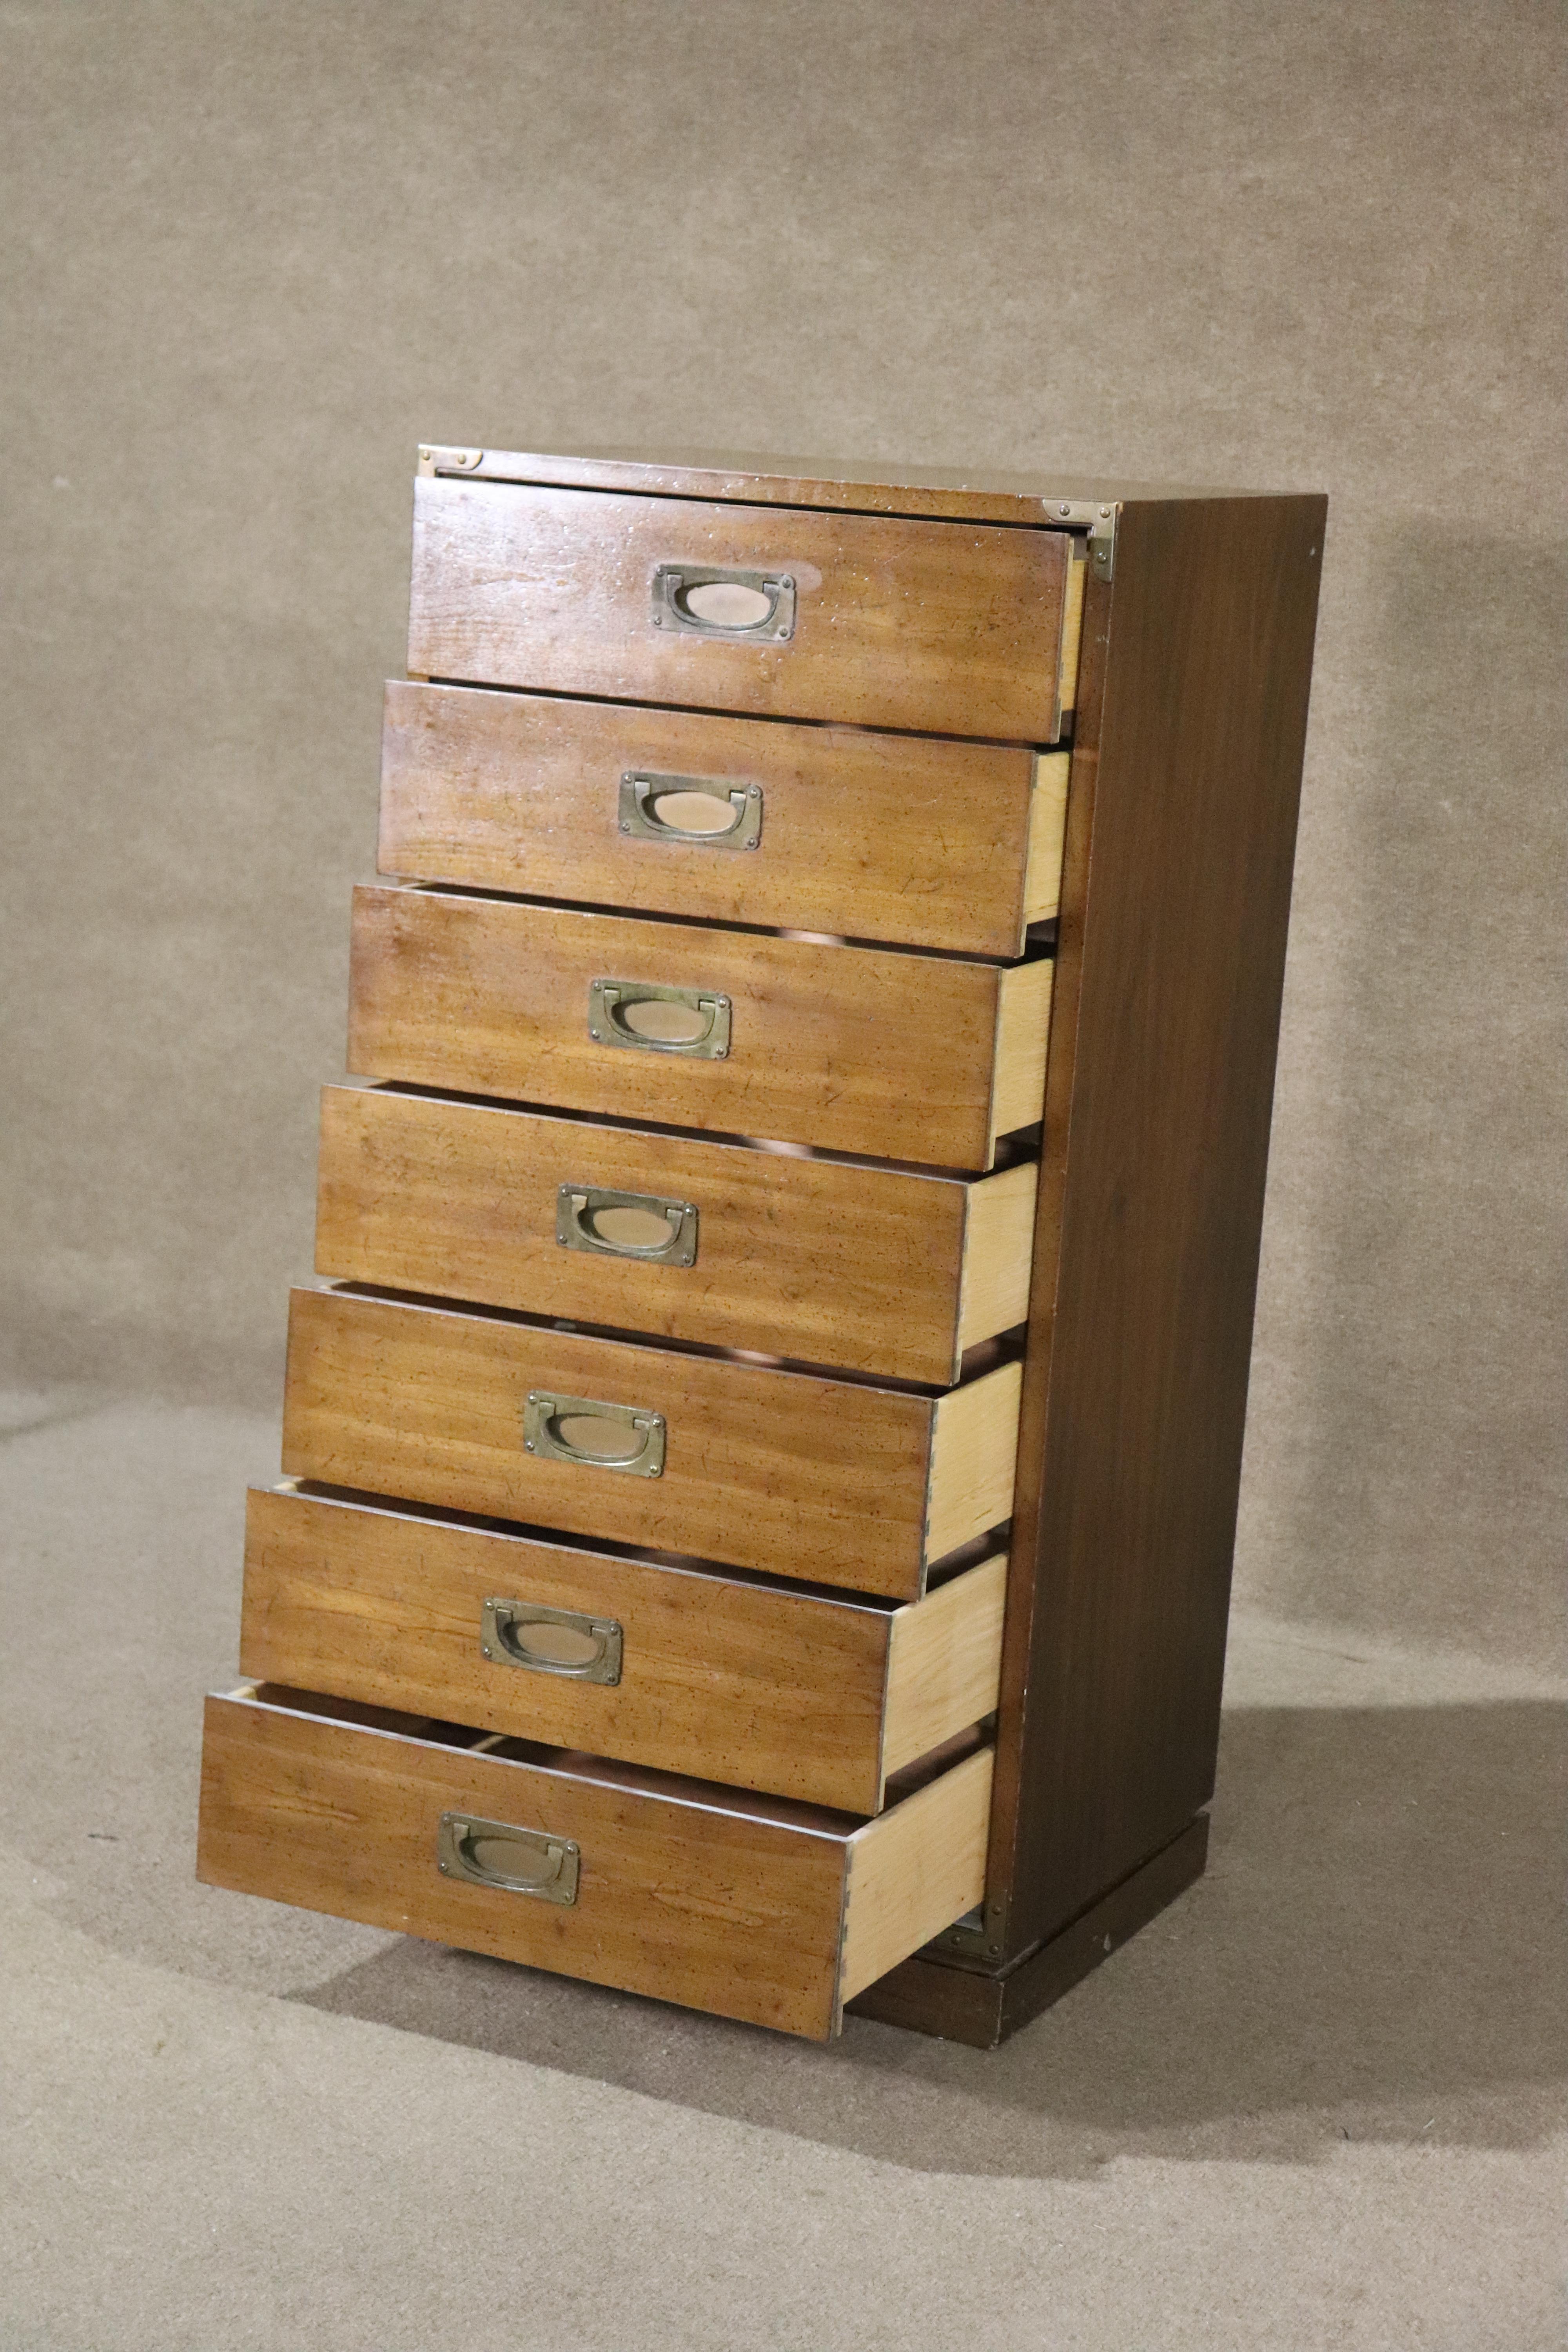 Mid-century modern tall chest of drawers by Drexel for their 'Barbados' collection. Featuring brass hardware and accents, giving a campaign style.
Please confirm location NY or NJ